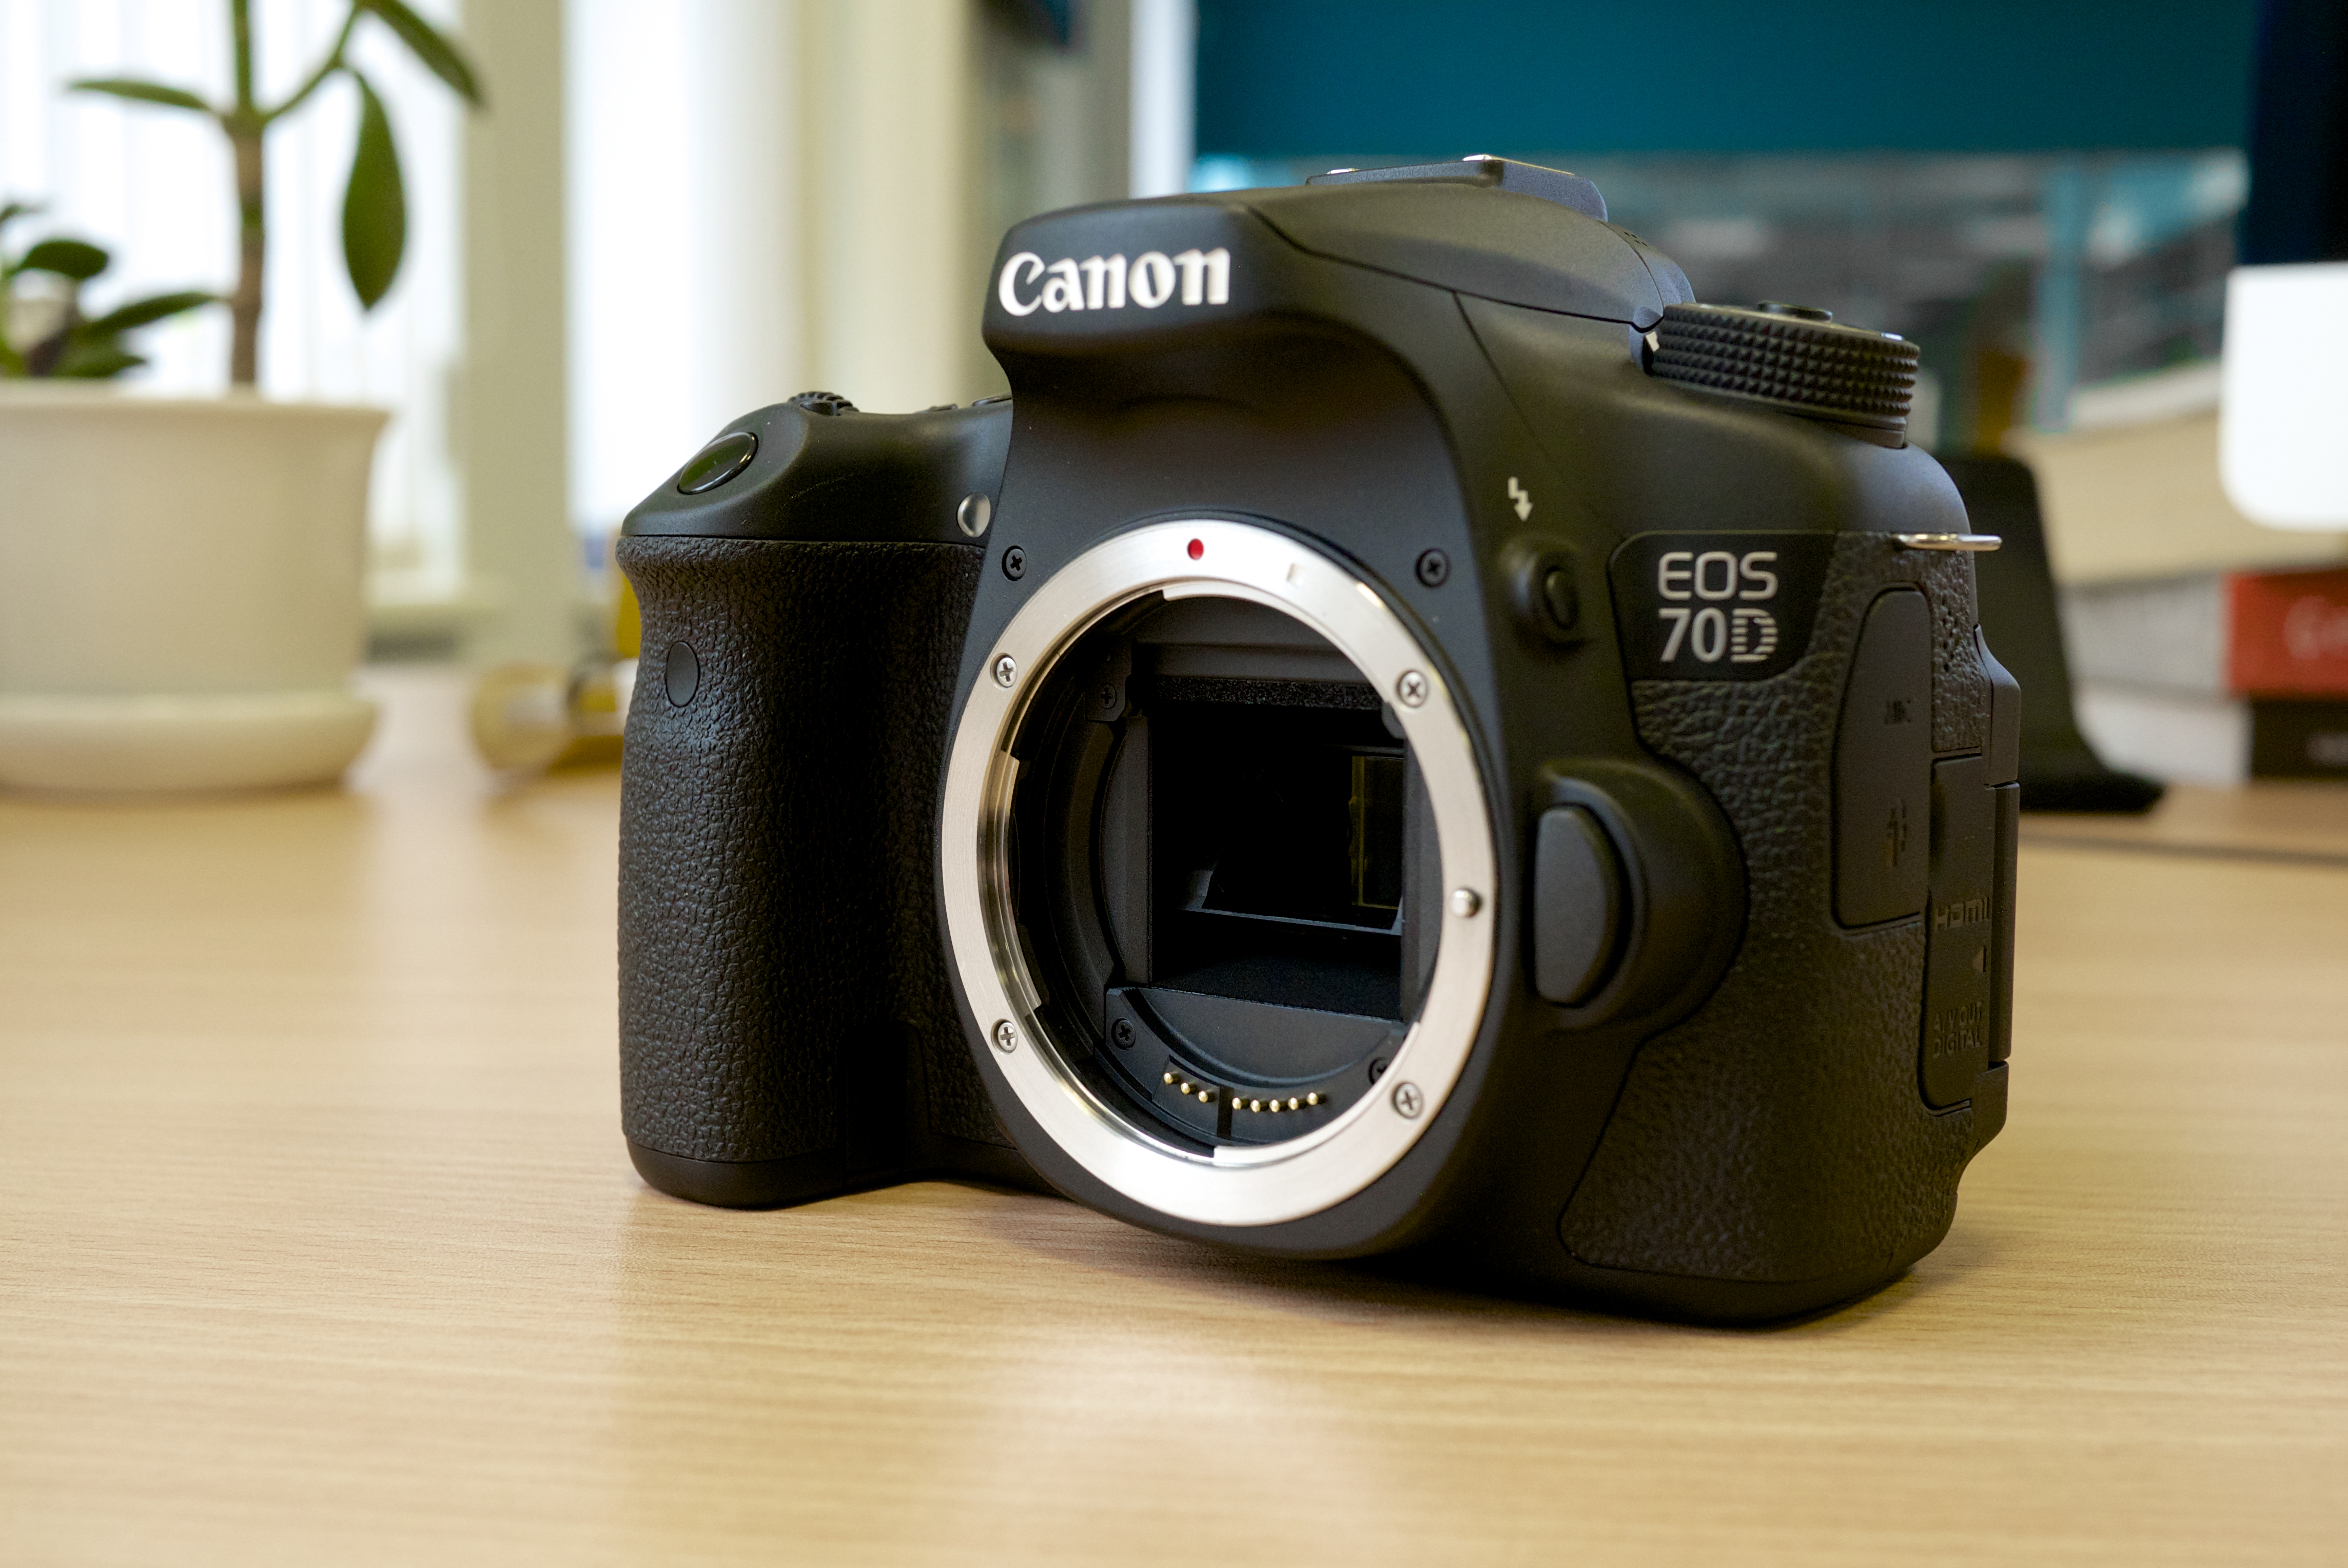 File:Canon EOS 70D (camera body side view).jpg - Wikimedia Commons